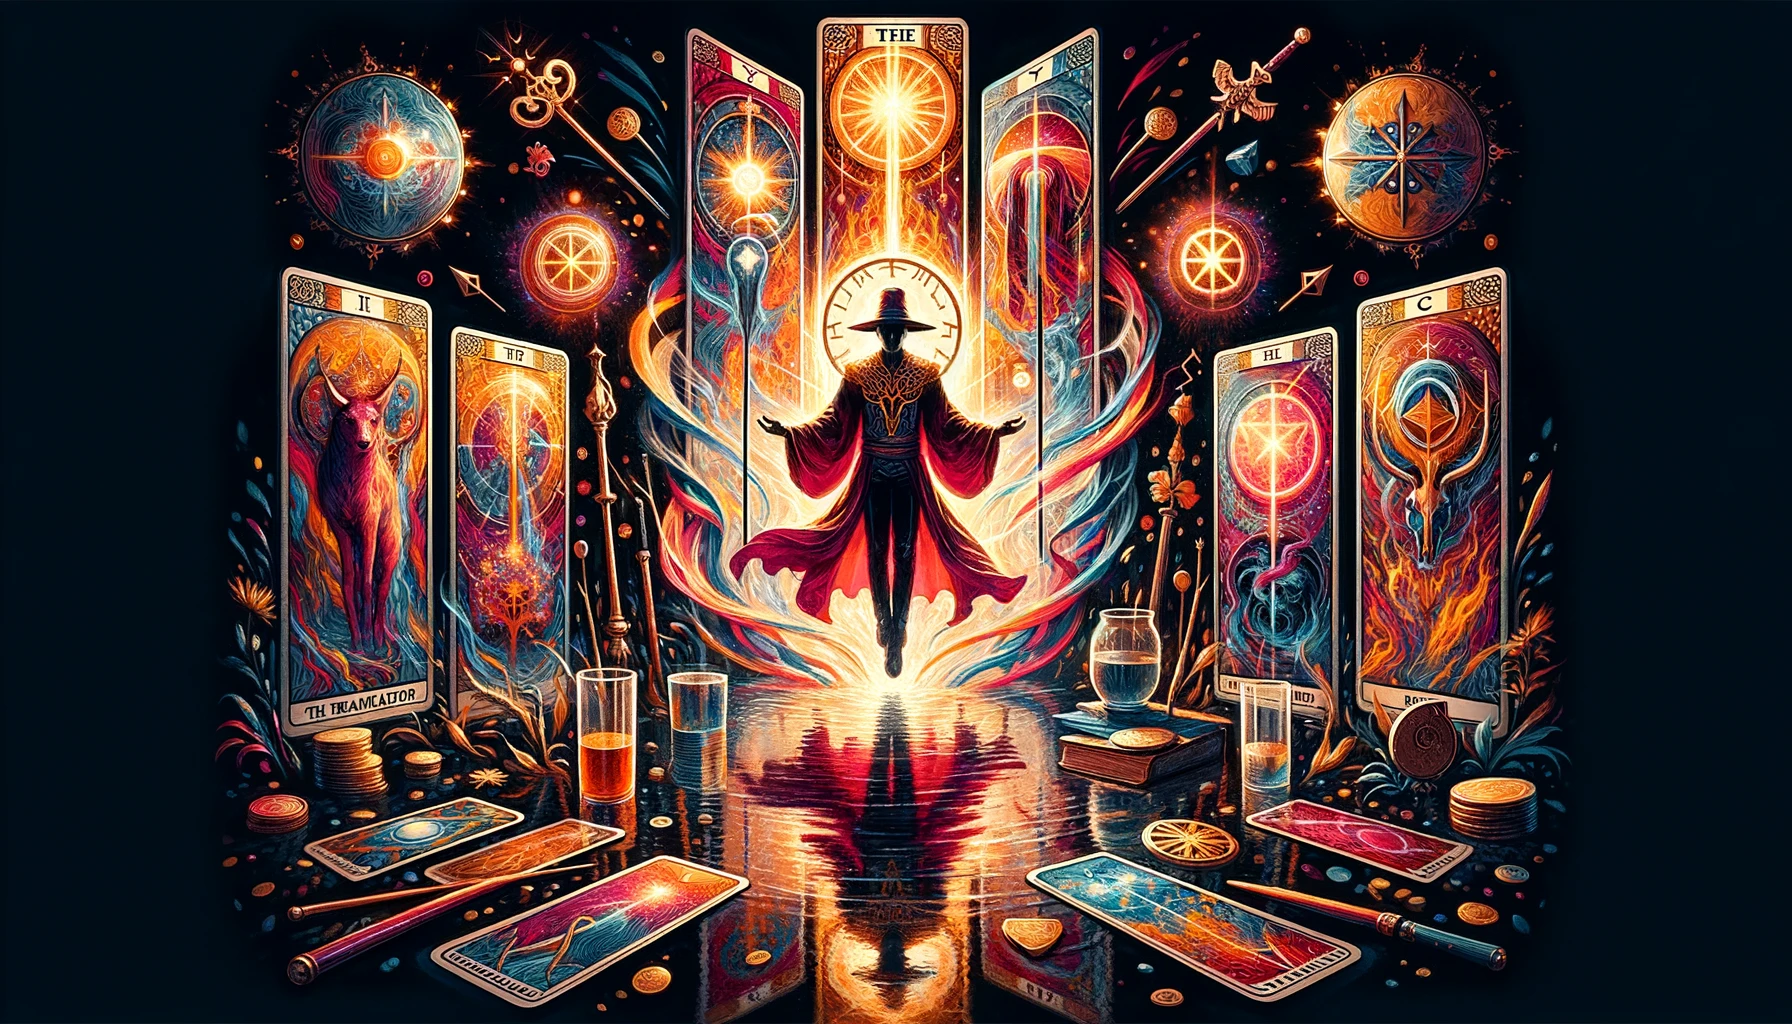 "Illustration portraying 'The Magician' Tarot card, featuring a figure in a moment of transformation and empowerment, surrounded by symbols of personal power and emotional dynamism."